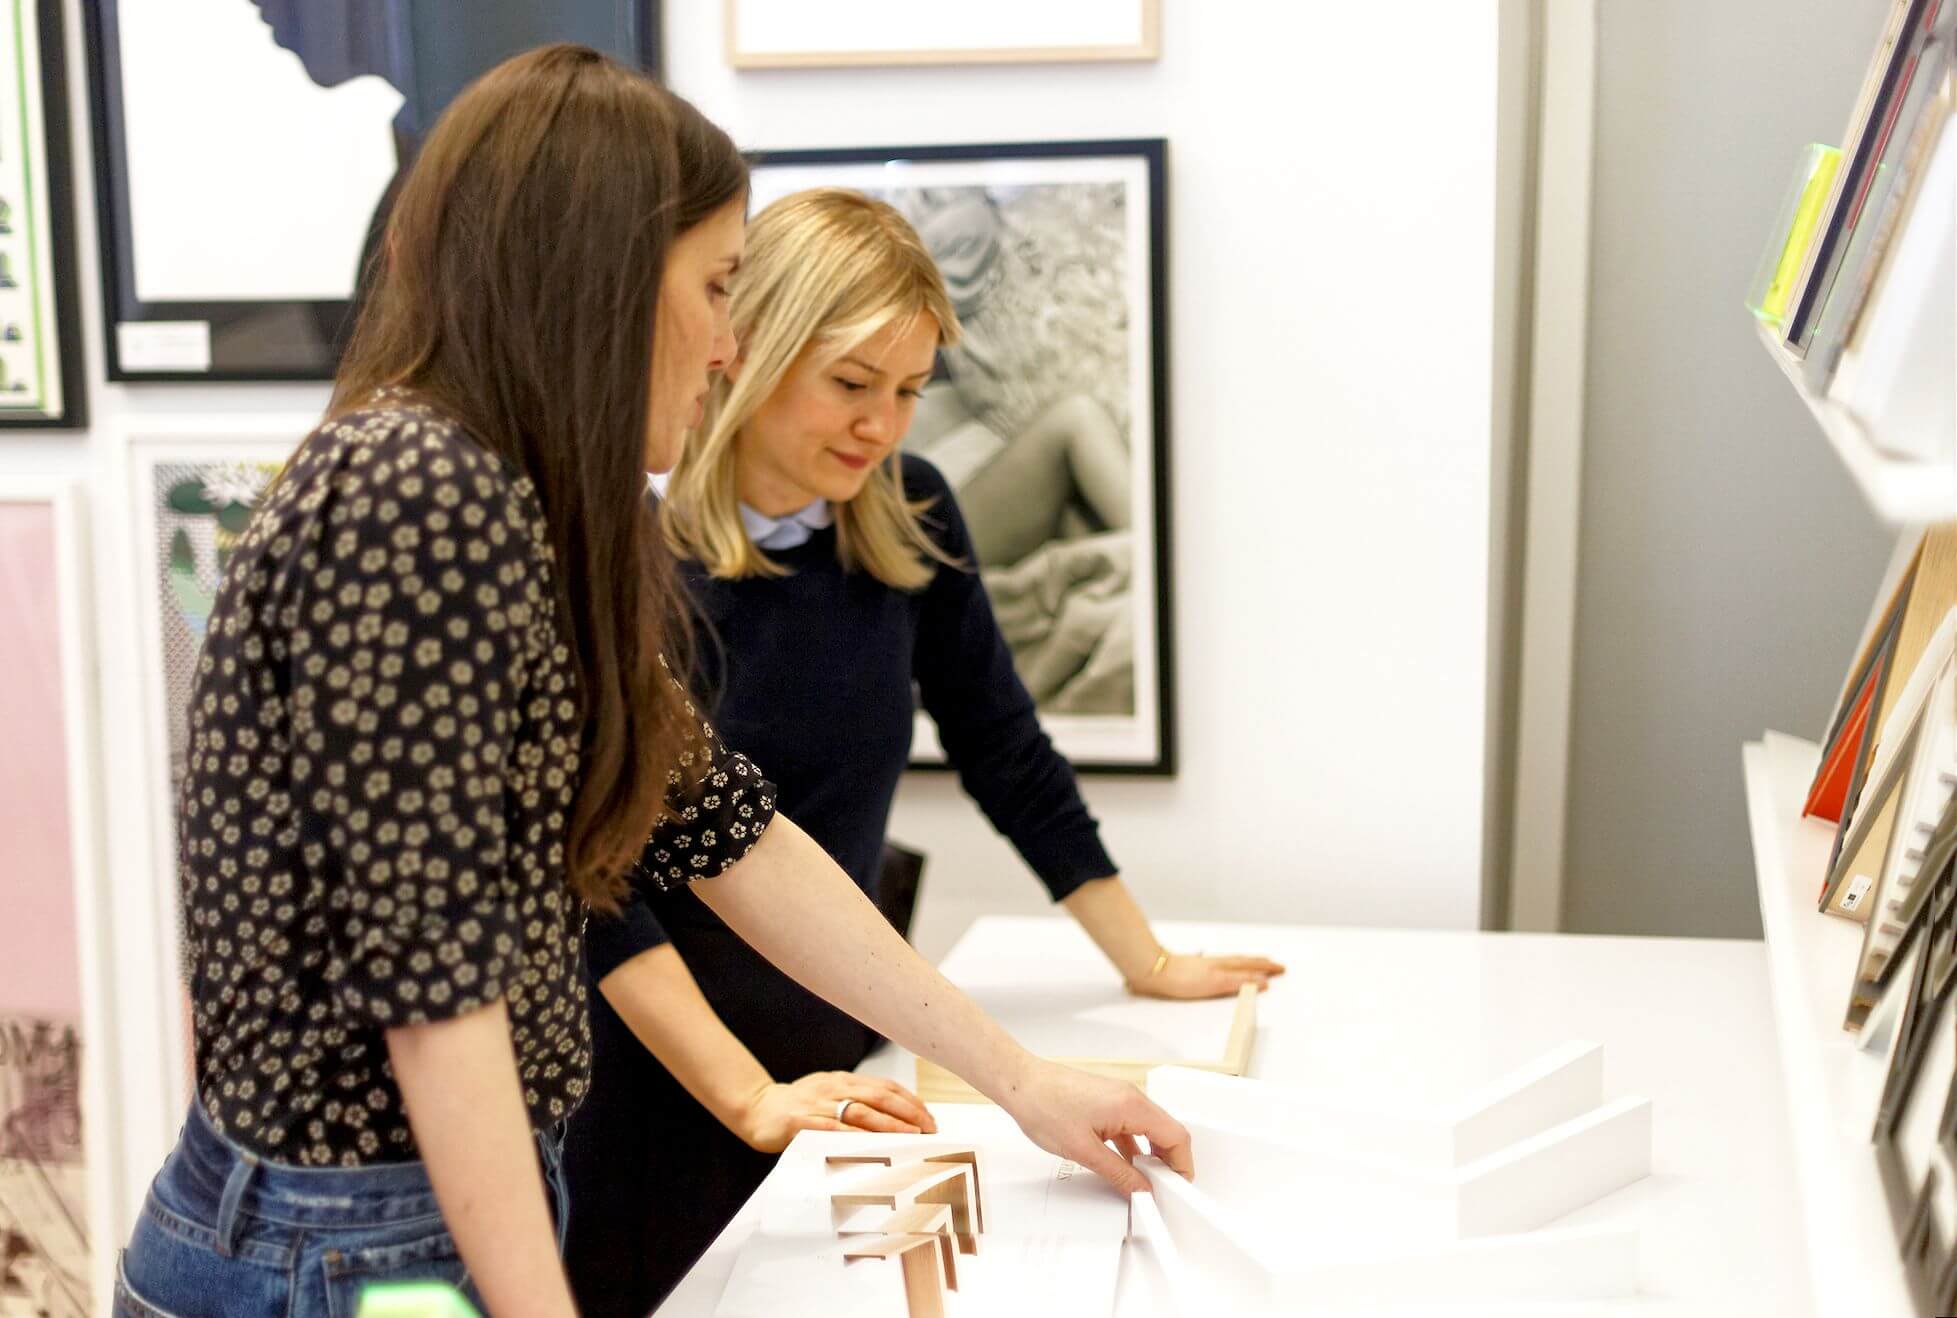 Dara helps a customer at a framing pop-up event at the MoMA Design Store. Photo courtesy of Simply Framed